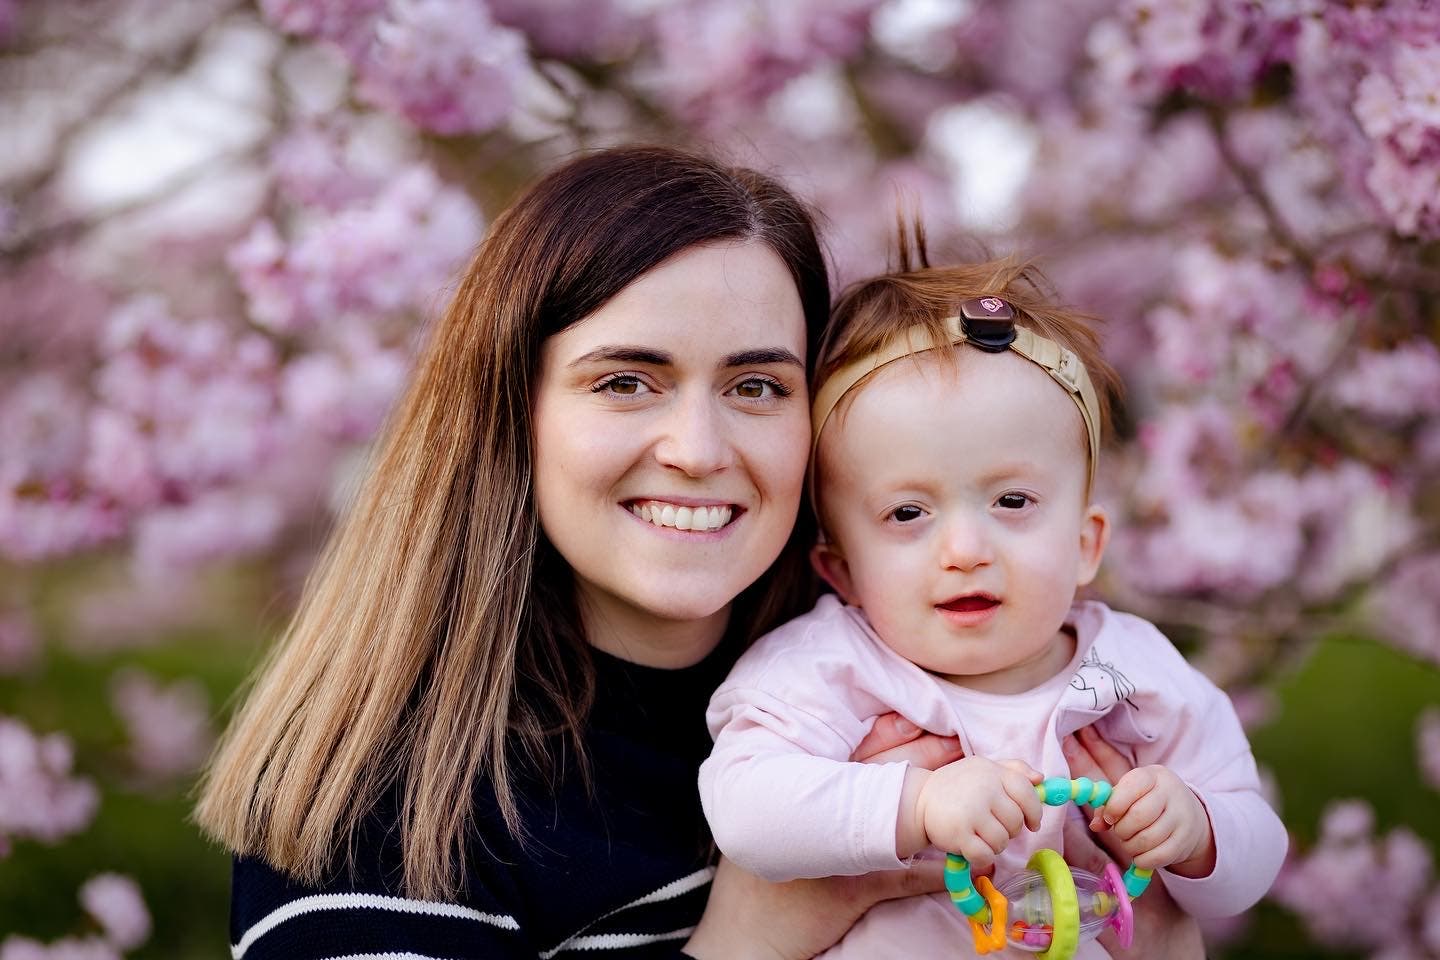 Among the thousands is two-year-old Sofia Brogden (right, with her mother Dasha), who was recruited to the DDD study and received a diagnosis when she was just one month old, while still in neonatal care